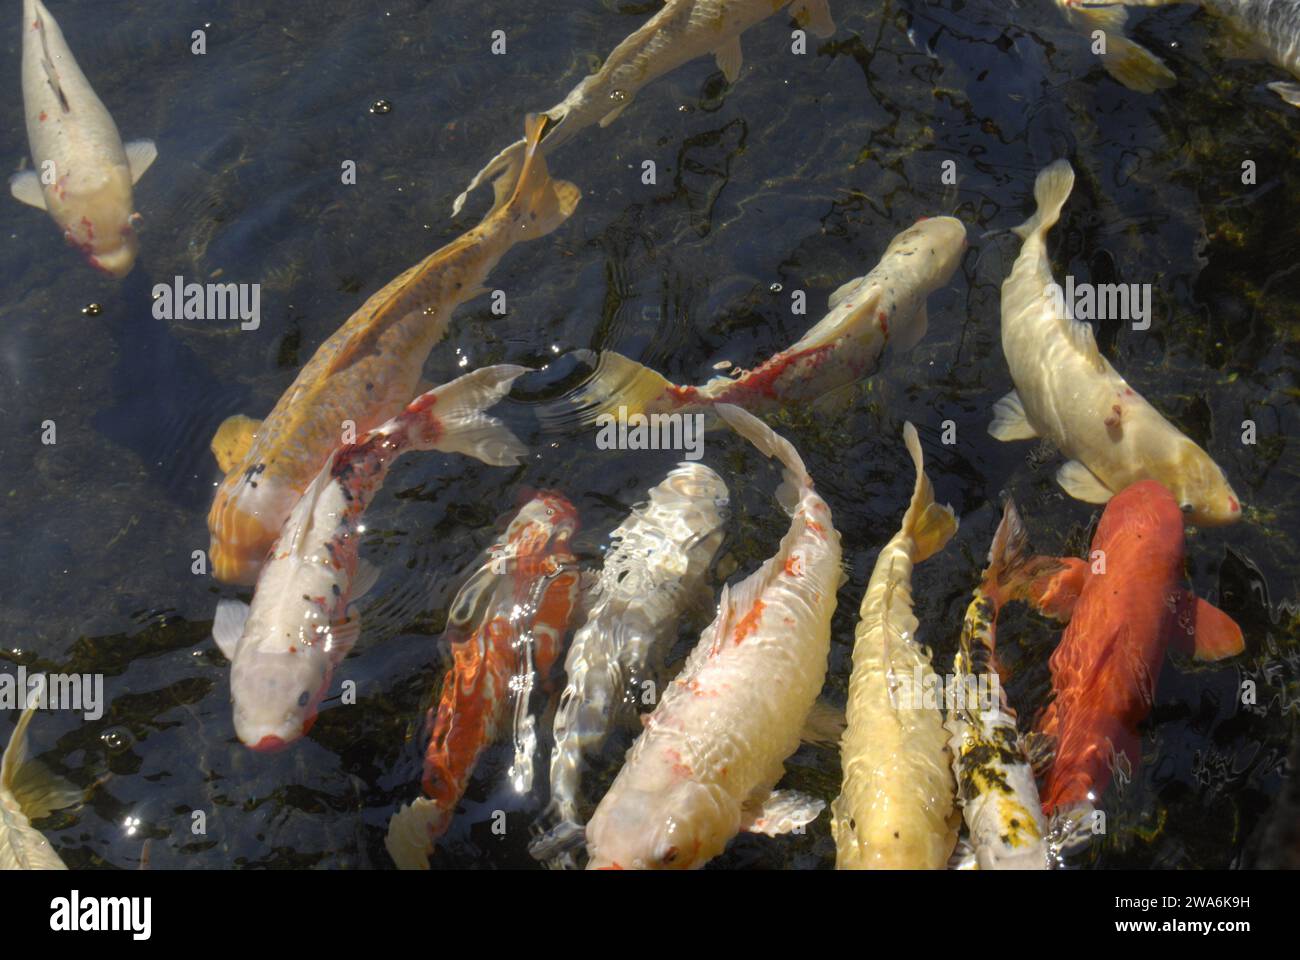 Maui .Hawaii islands ,USA   colourful fish in pond        11 January 2015        hoto by Francis Joseph Dean/Deanpictures) Stock Photo